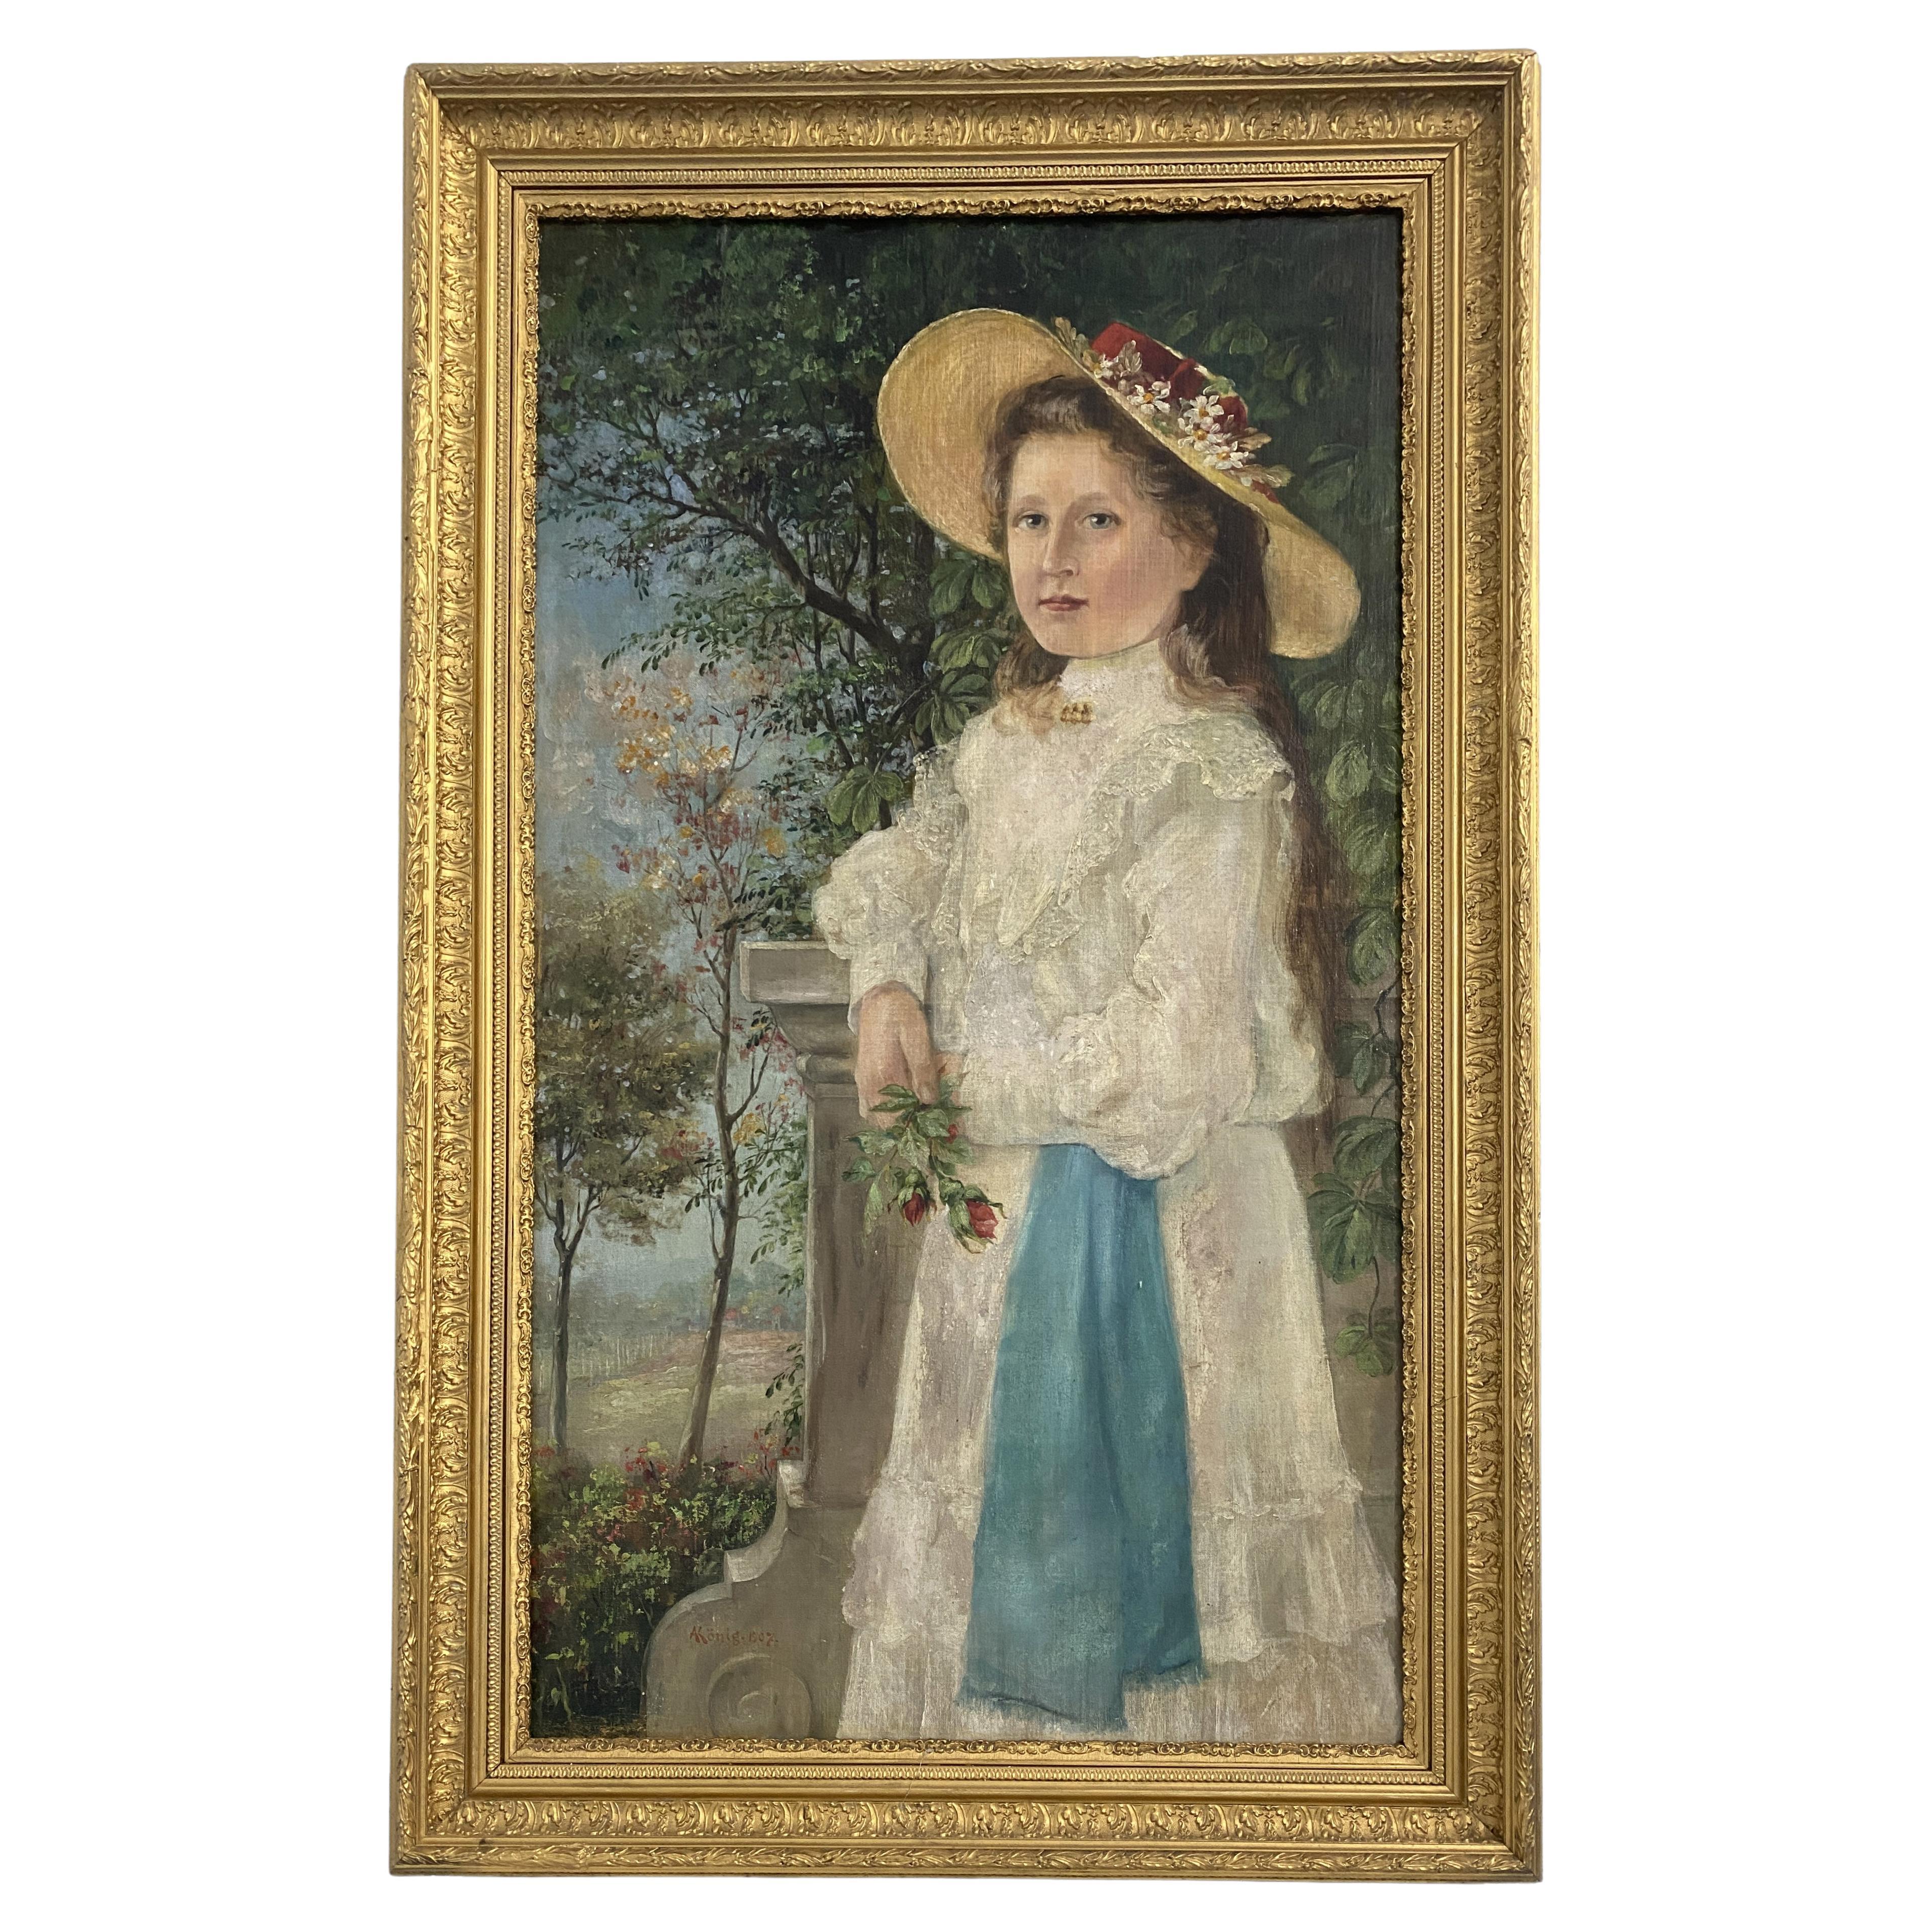 Antique German oil painting "Portrait of a Maiden" from 1901 signed Konig